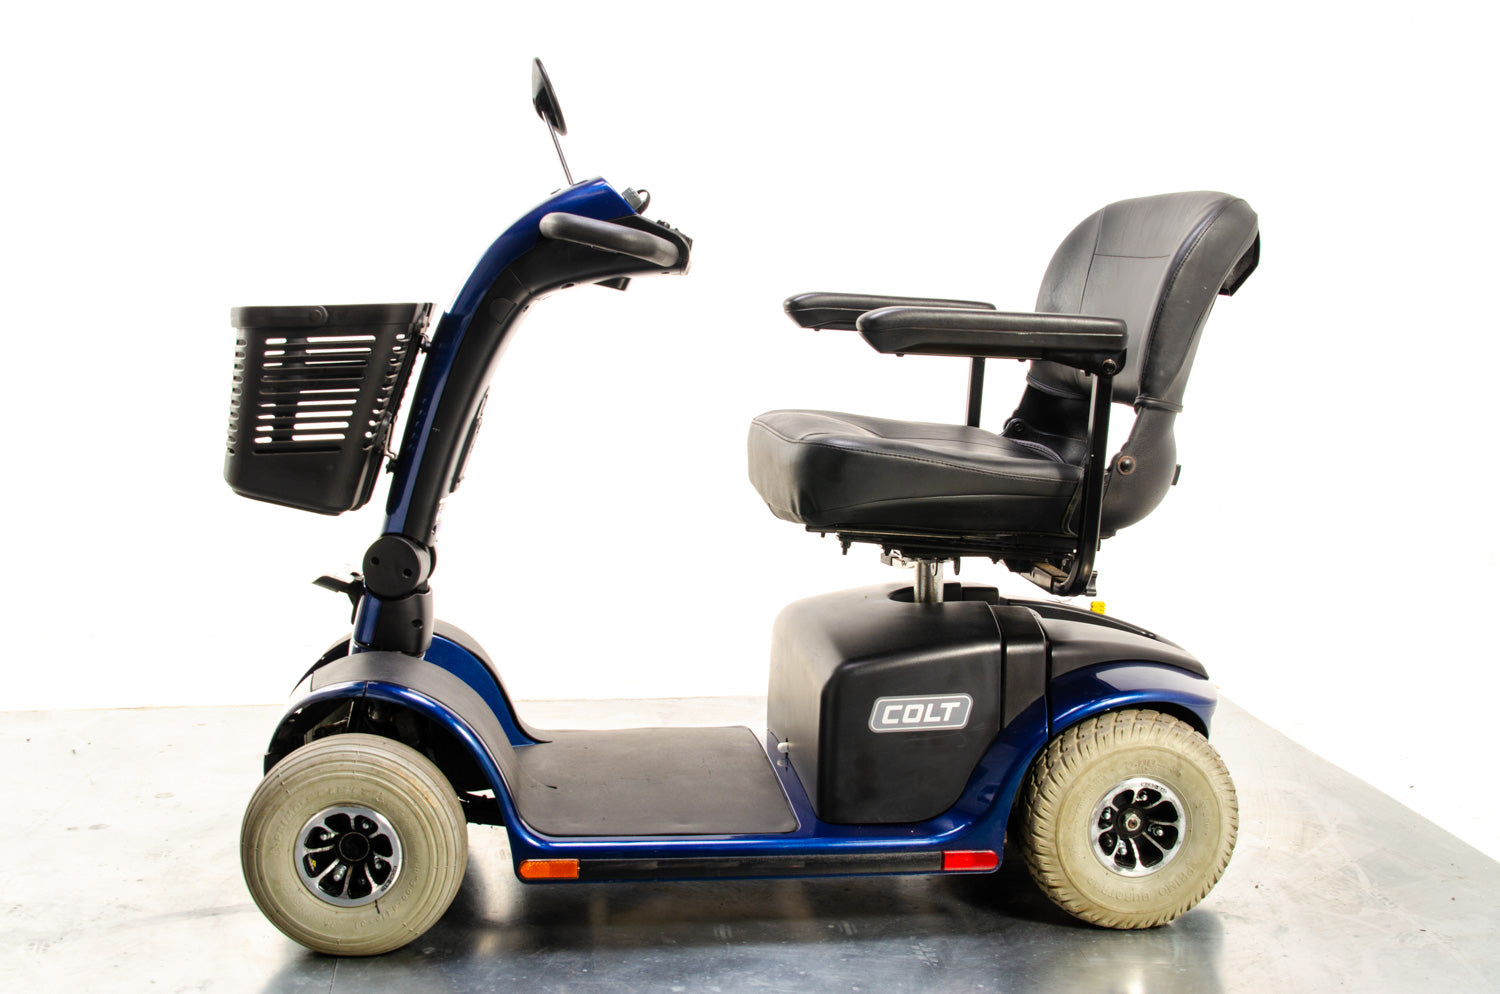 Pride Colt Plus 4mph Mid Size Transportable Mobility Boot Scooter Blue 13621